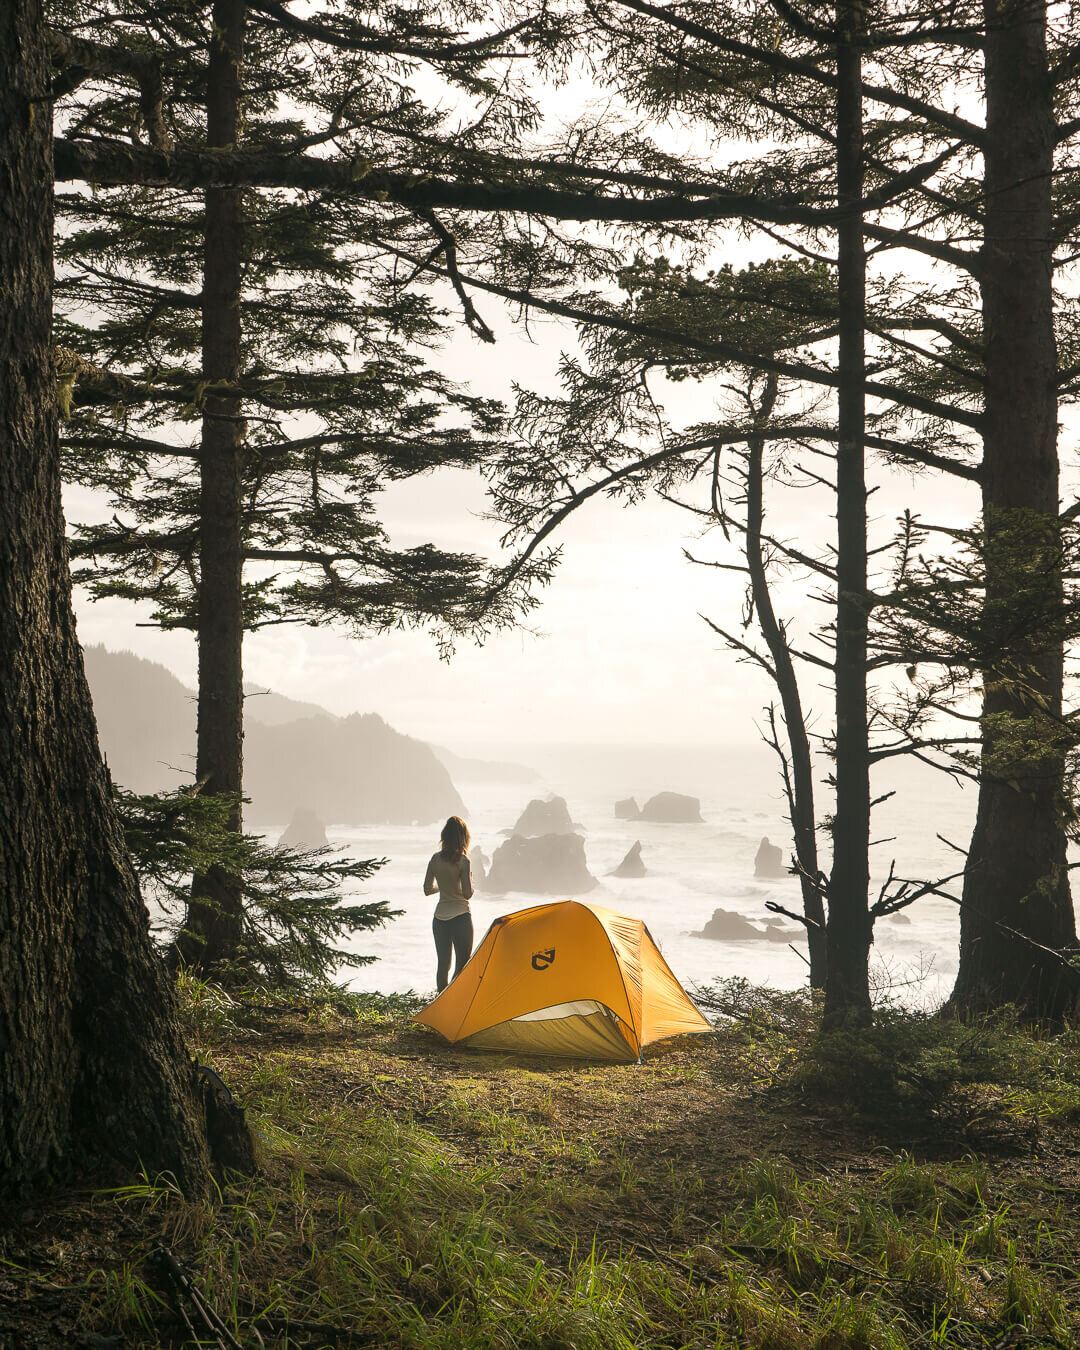 Camping on the coast.